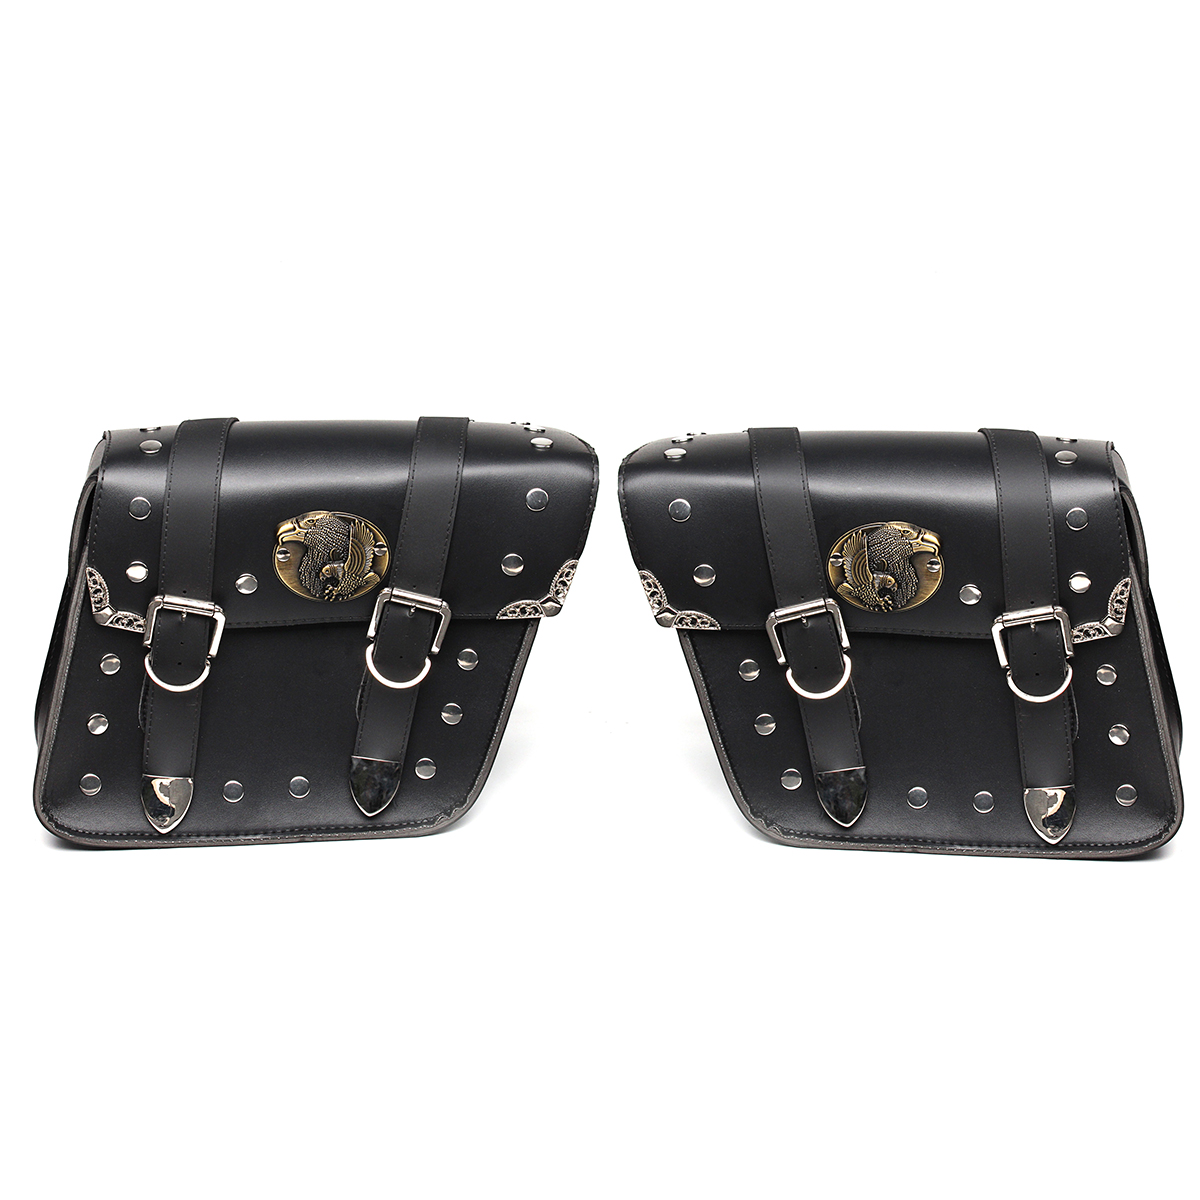 Motorcycle Saddlebags Side Bag Tool Bags Left Right for Chopper Black - Auto GoShop